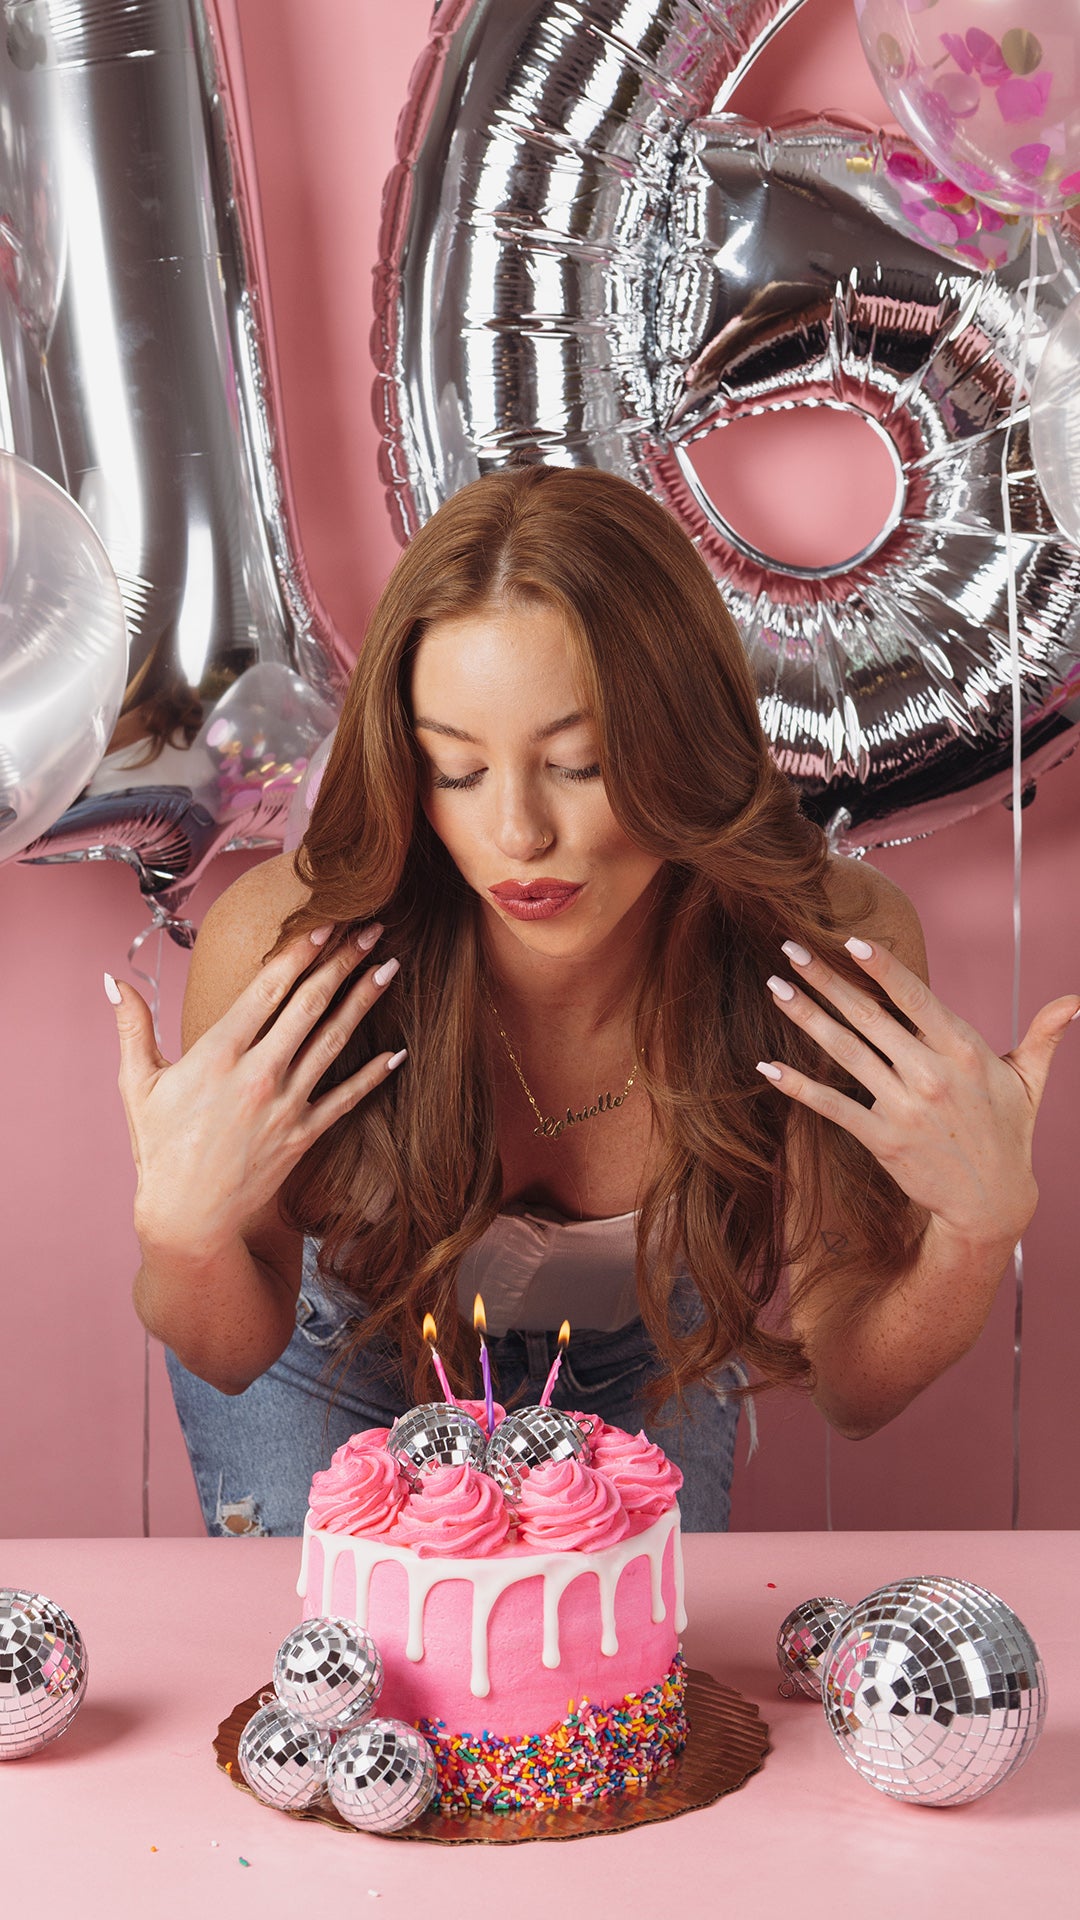 JOIN THE PARTY! KERATIN COMPLEX® CELEBRATES THEIR SWEET 16 BRAND ANNIVERSARY!